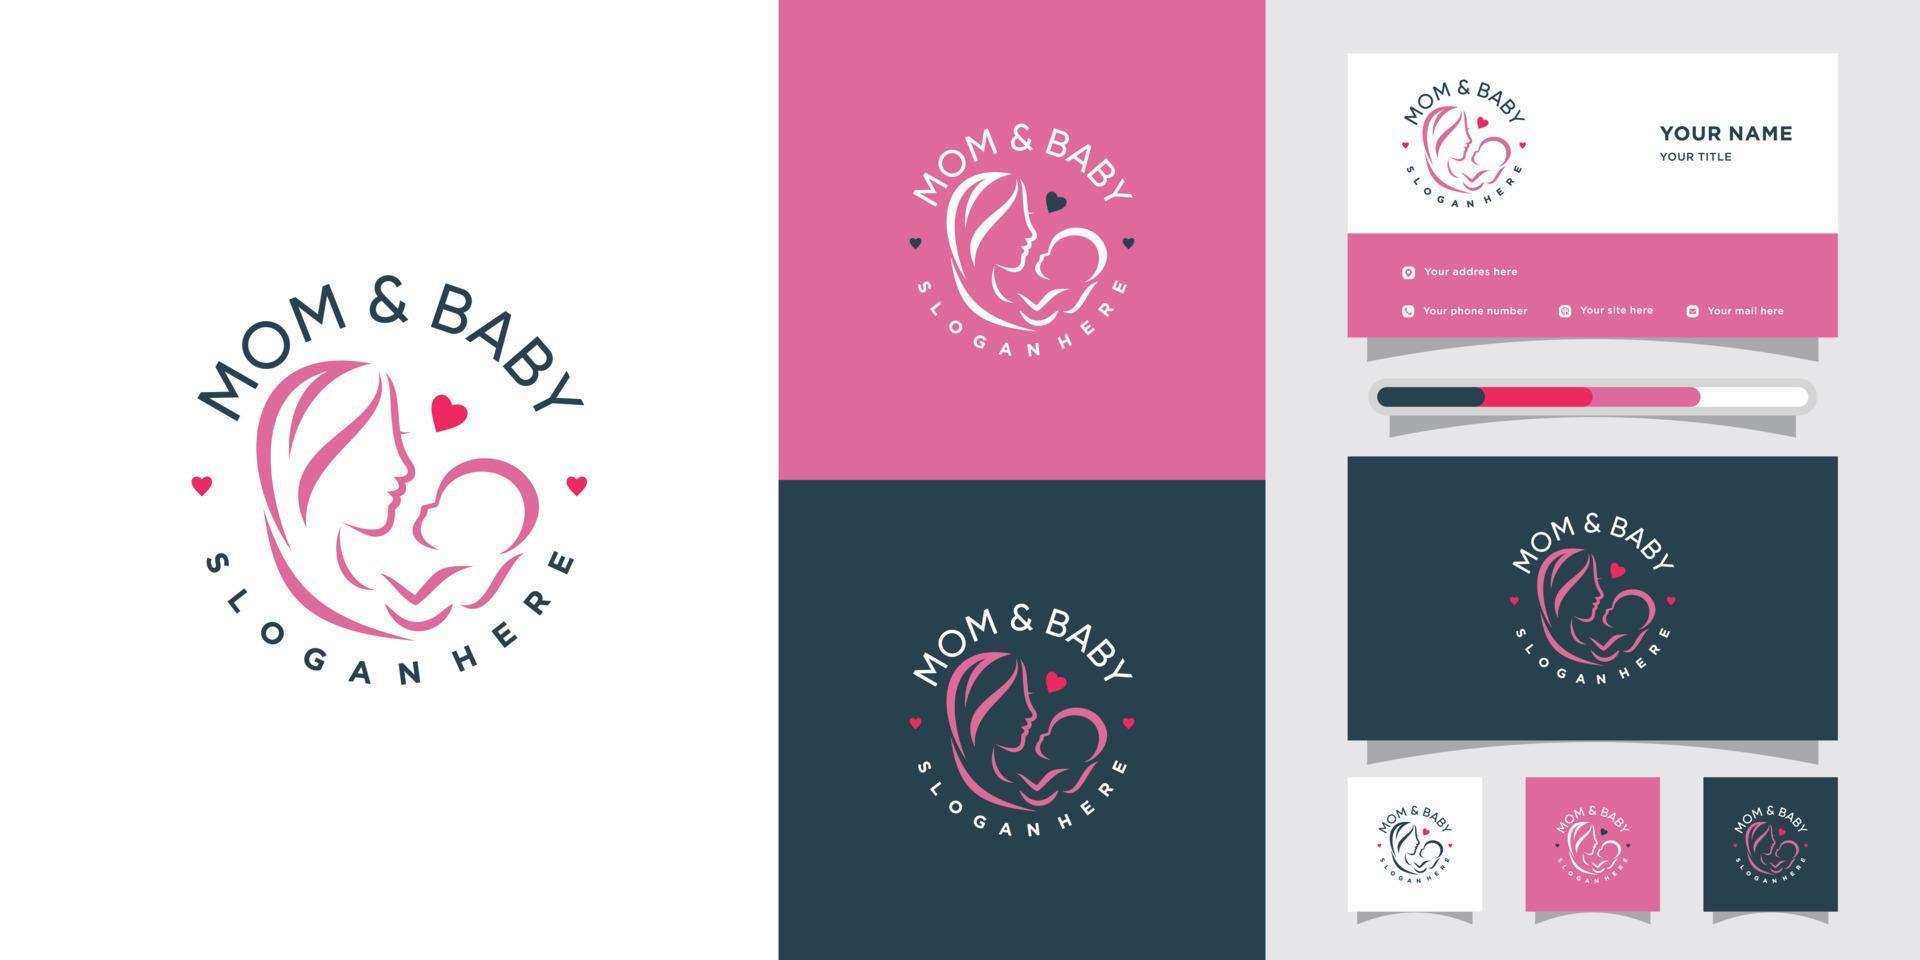 Mom and baby icon logo with modern concept and business card design Premium Vector